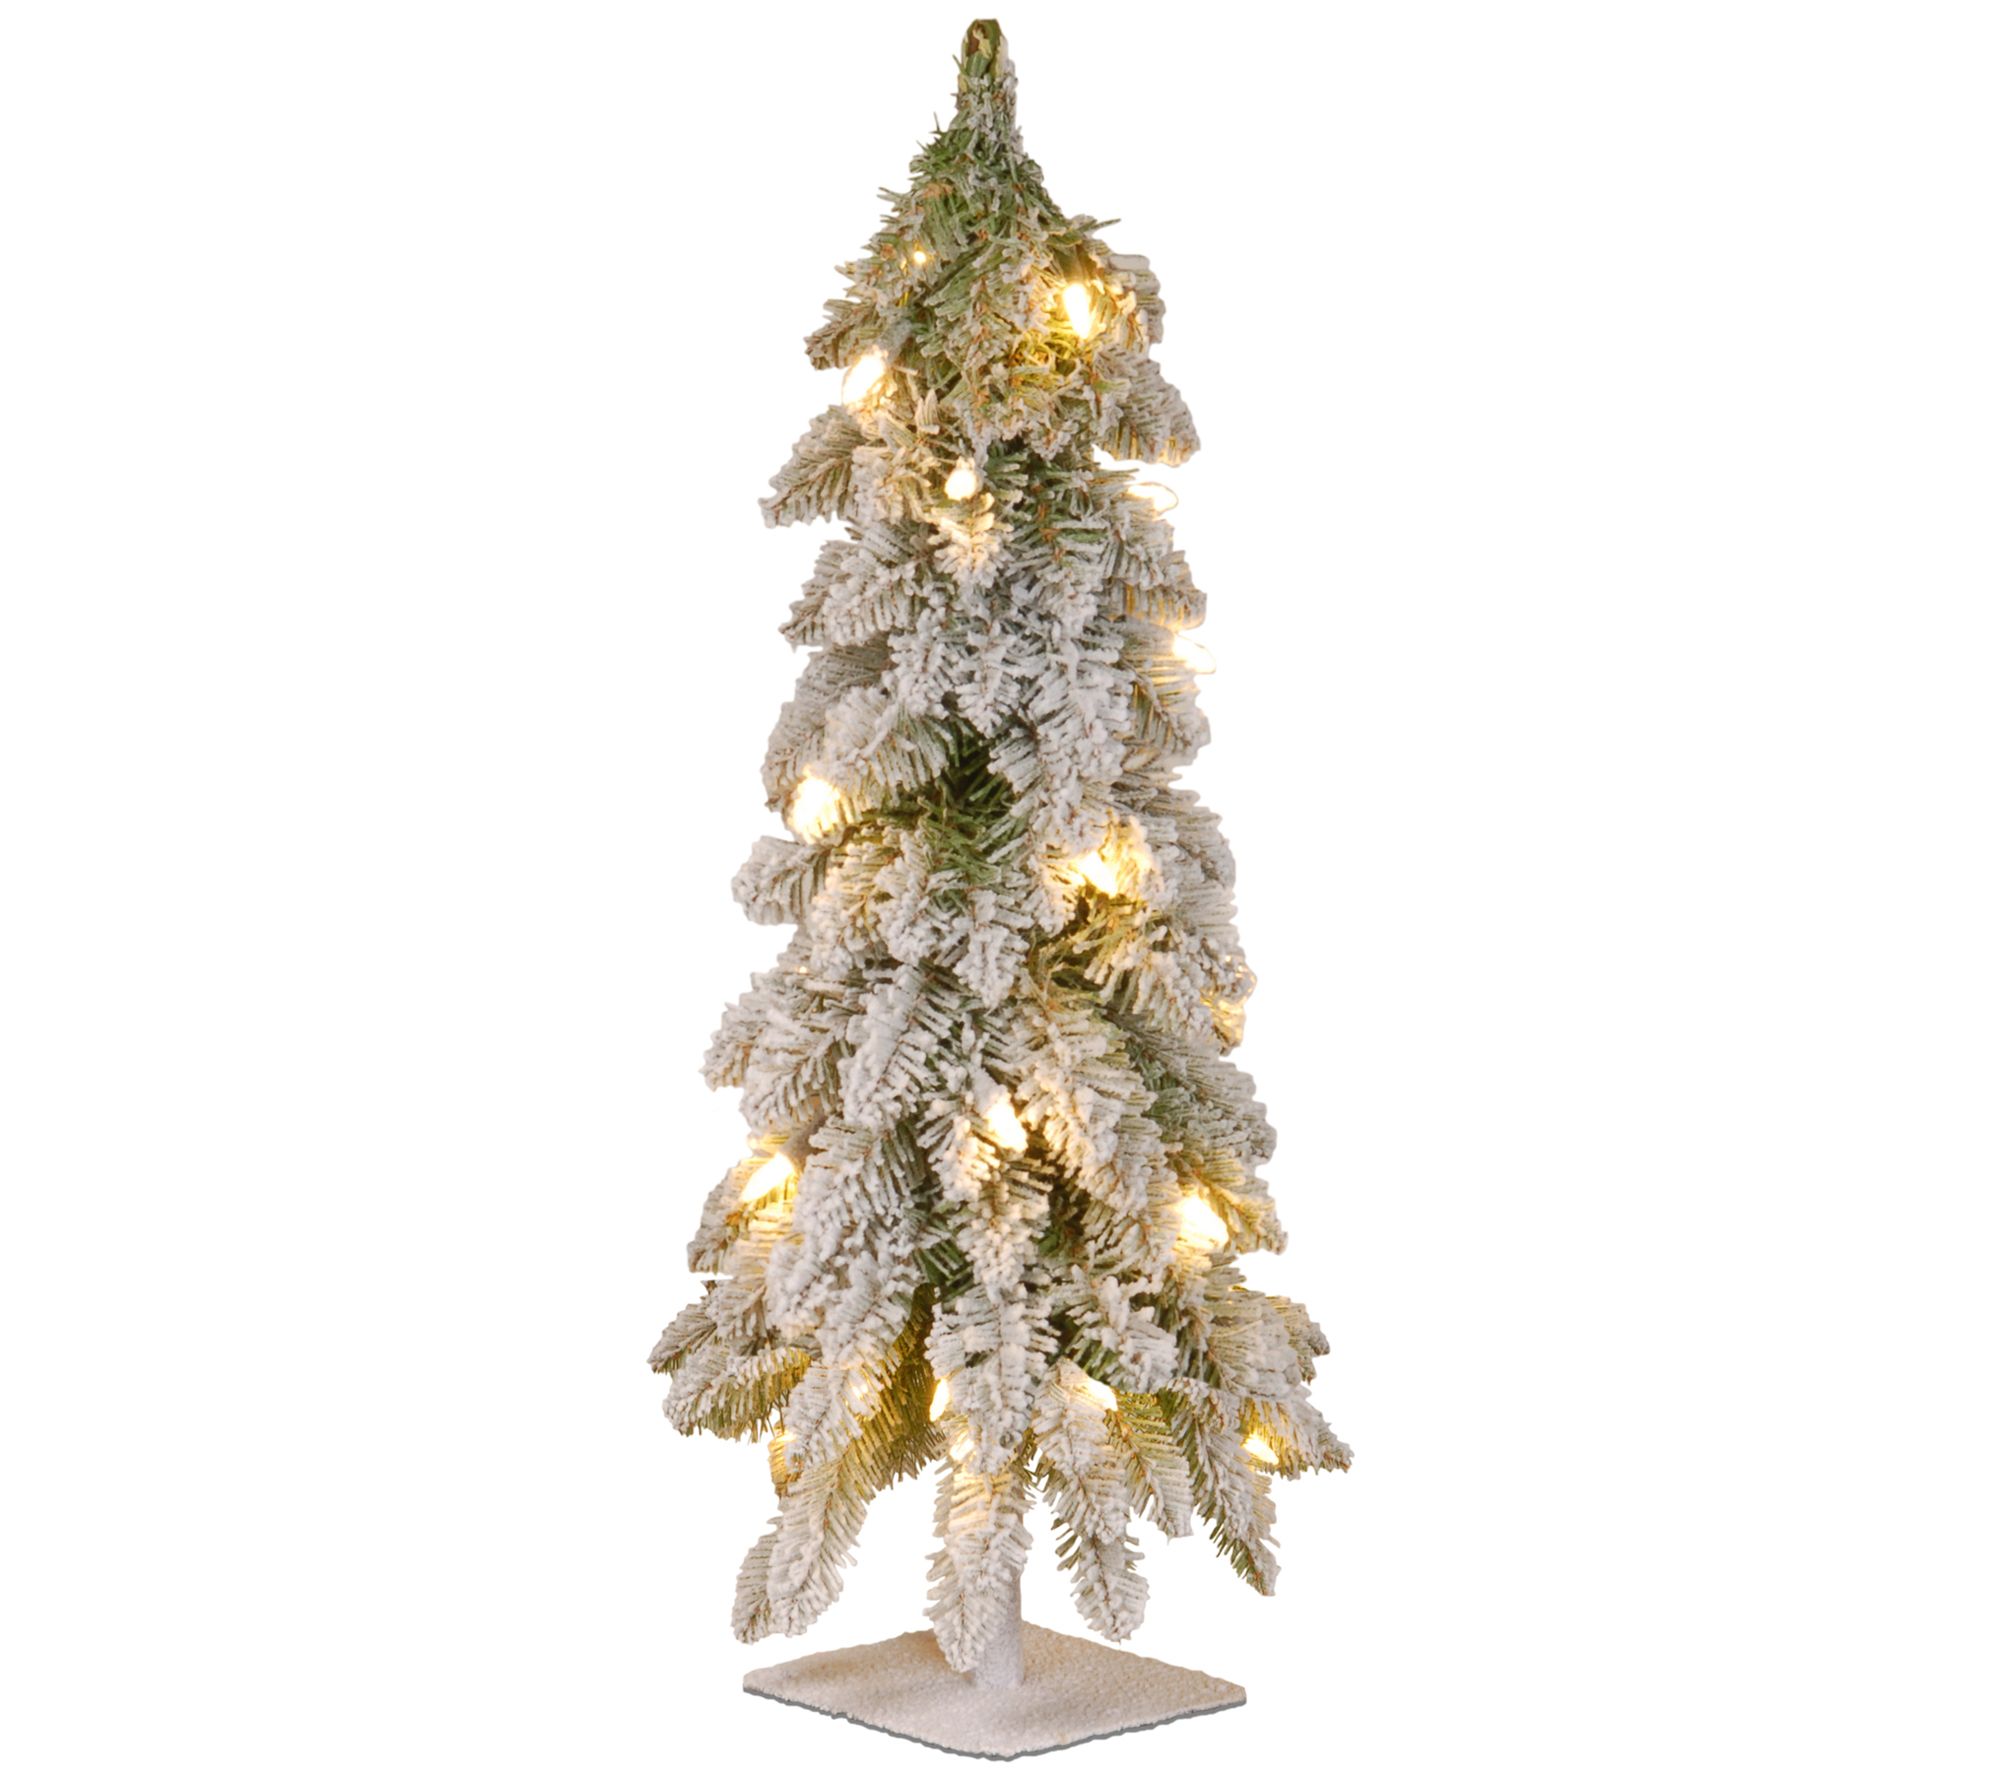 National Tree Co. White Iridescent 4 Foot Pre-Lit Christmas Tree